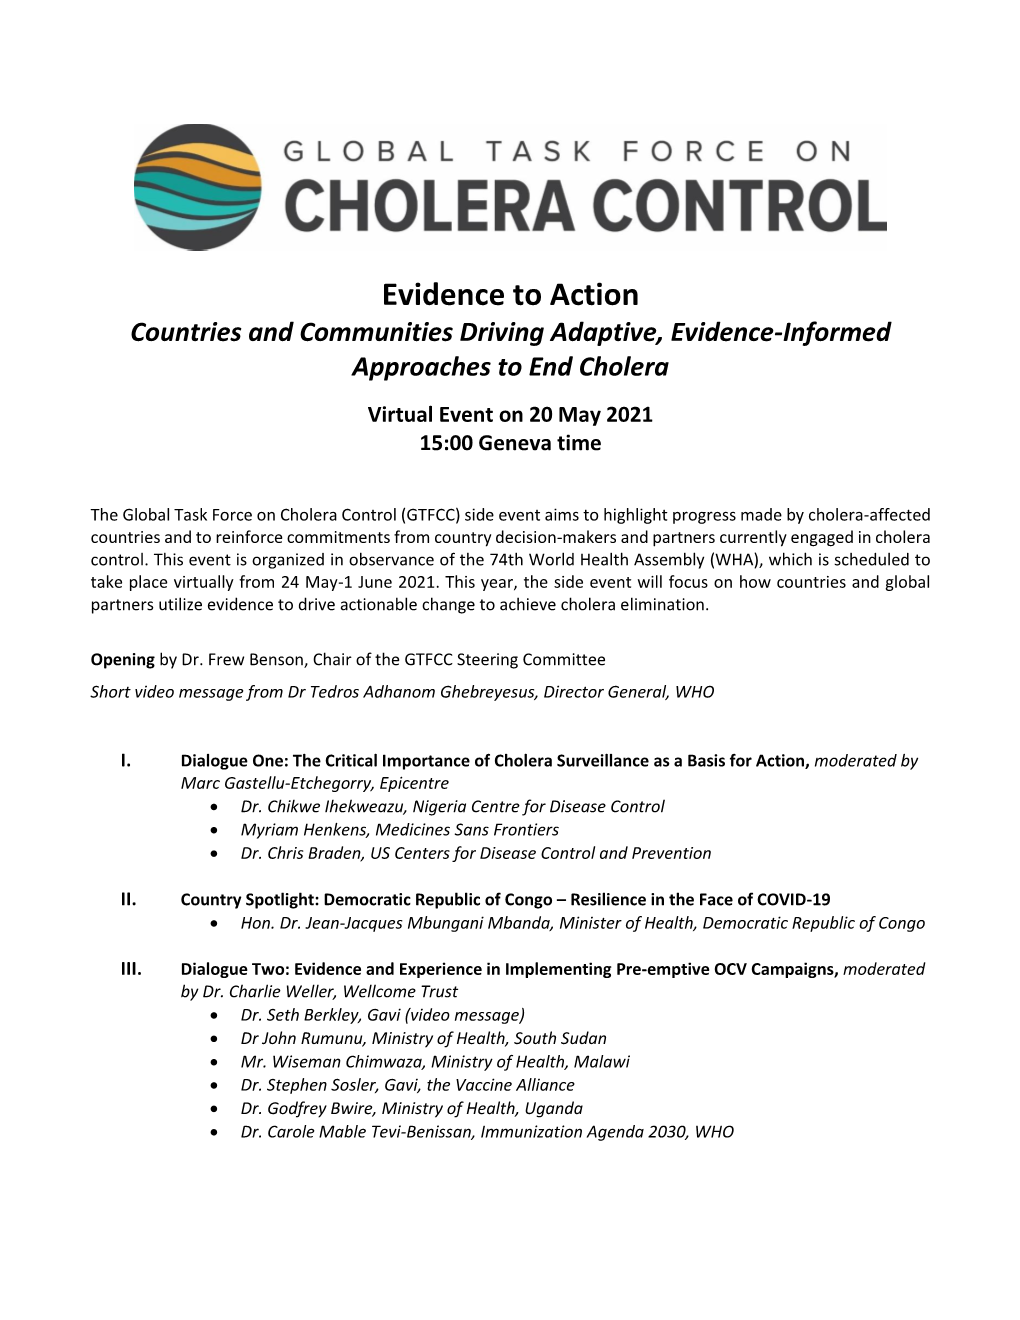 Evidence to Action Countries and Communities Driving Adaptive, Evidence-Informed Approaches to End Cholera